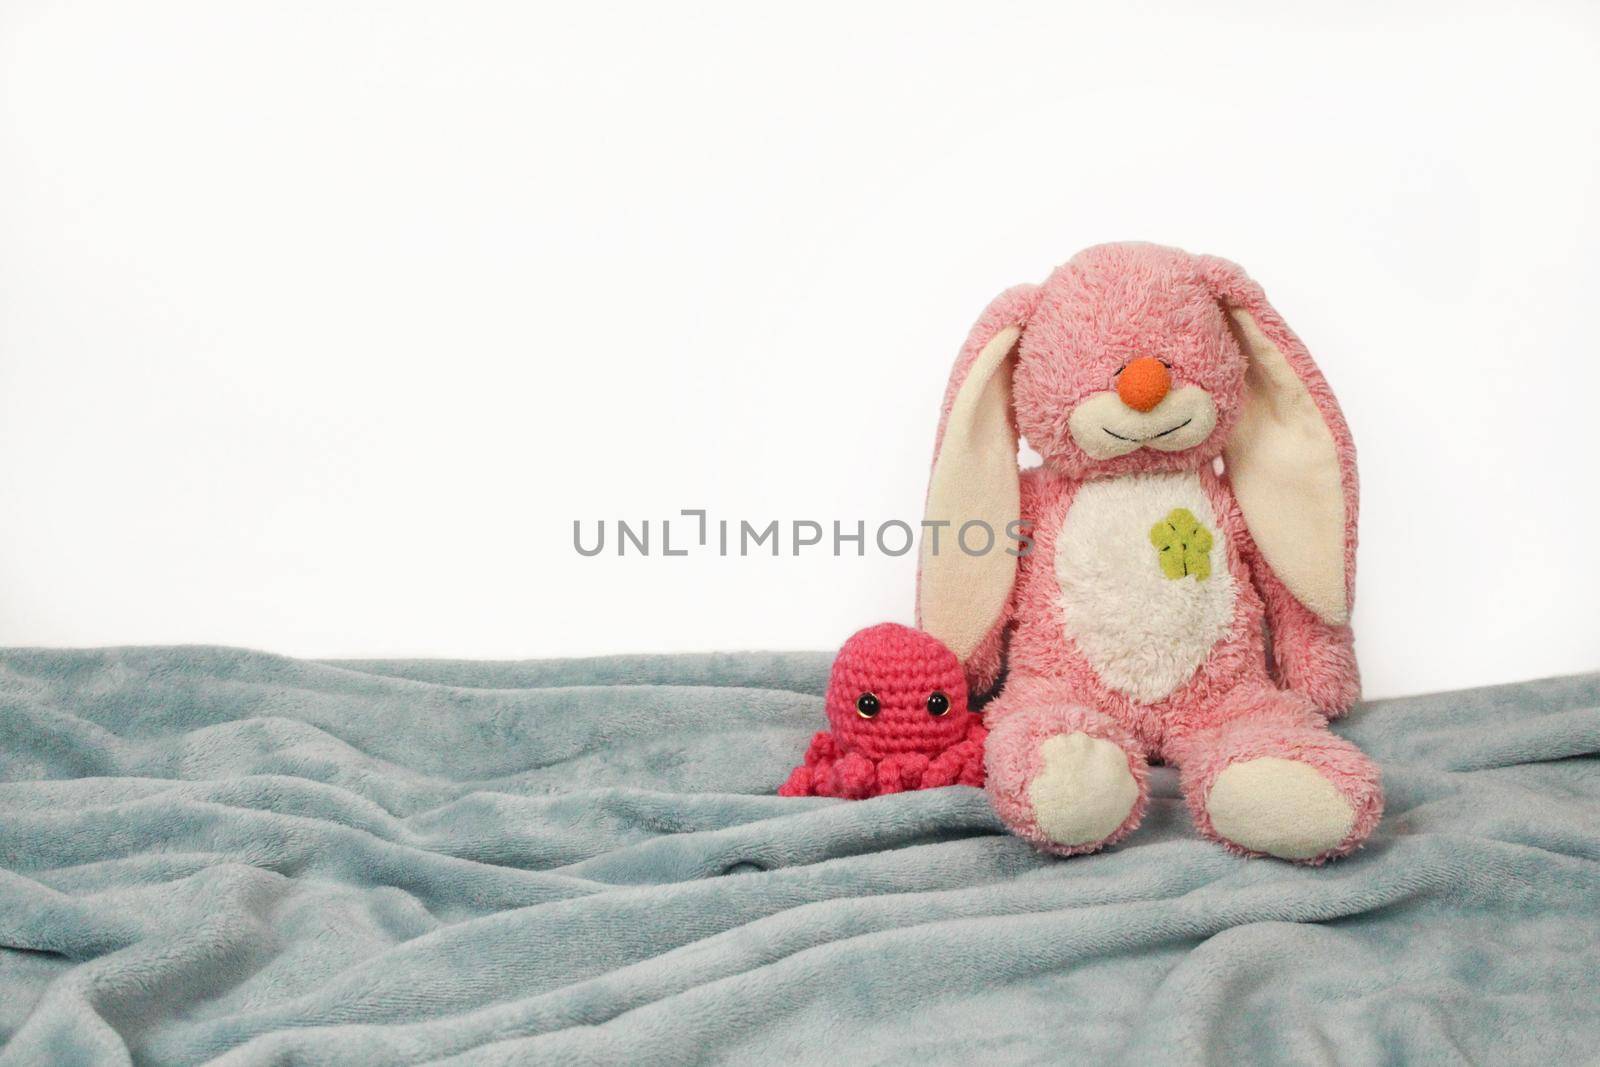 A plush toy sitting on plush blanket and white wall. Plush pink bunny toy with pink knitted octopus. by JuliaDorian